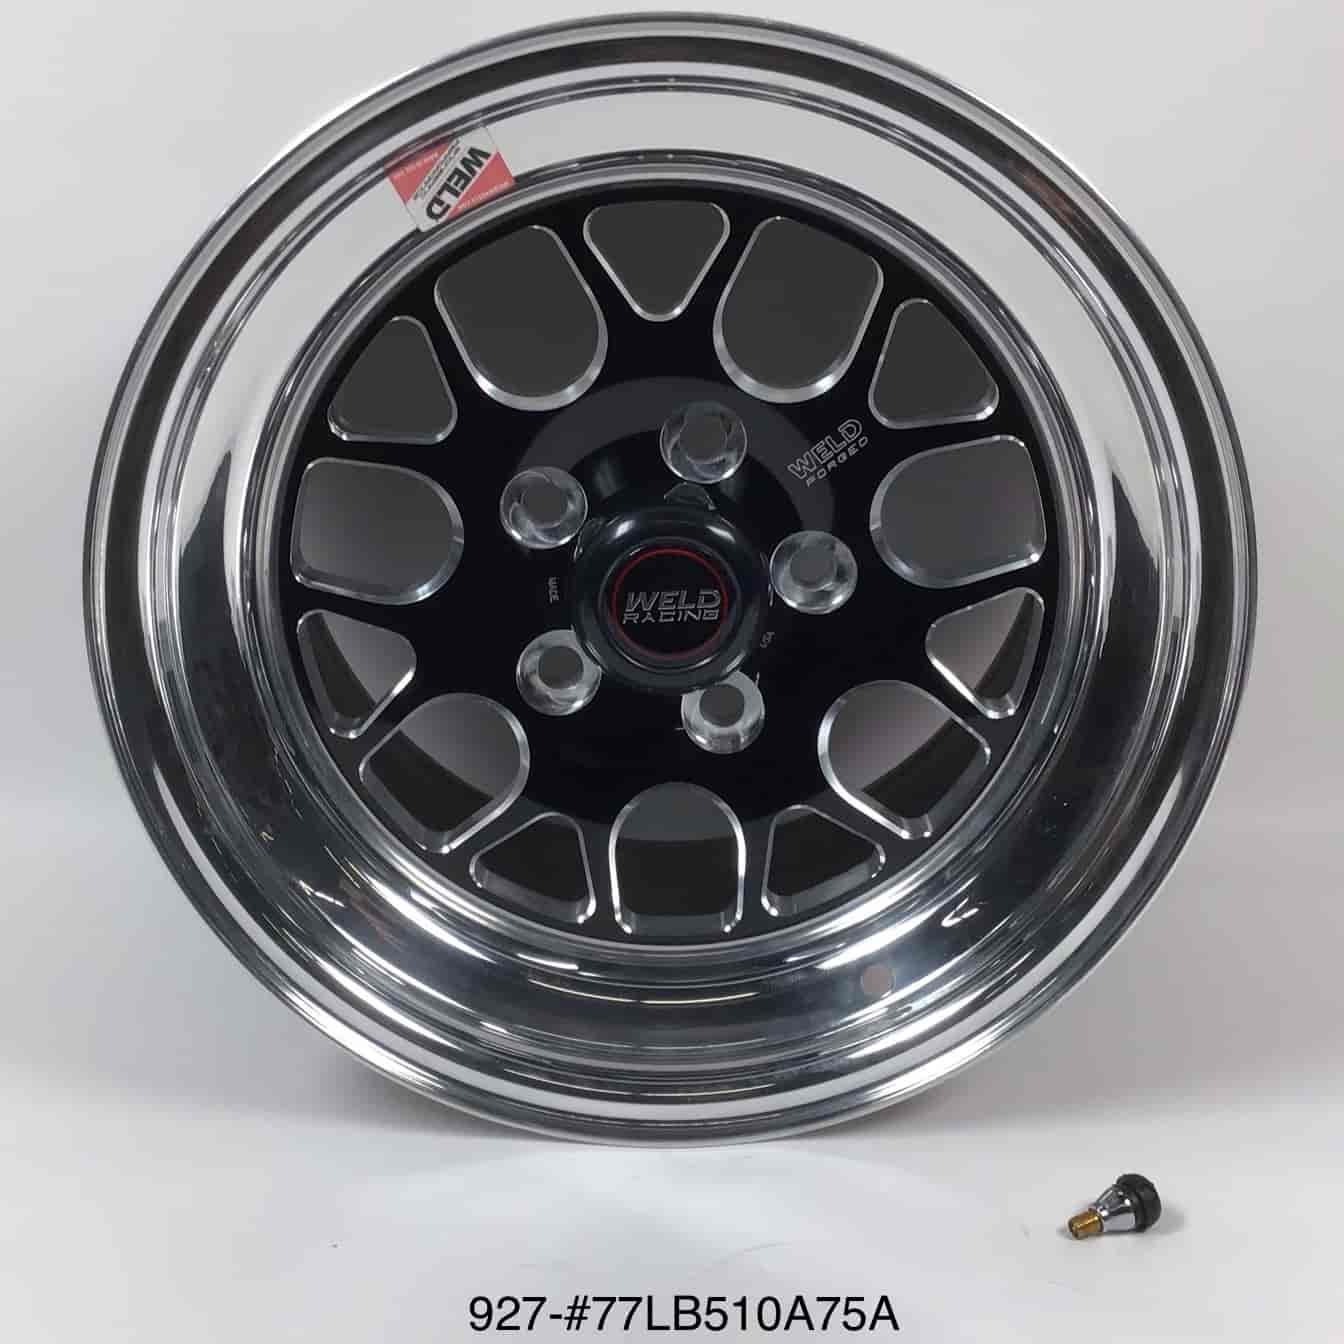 *BLEMISHED* RT-S Series S77 Black Wheel Size: 15" x 10"